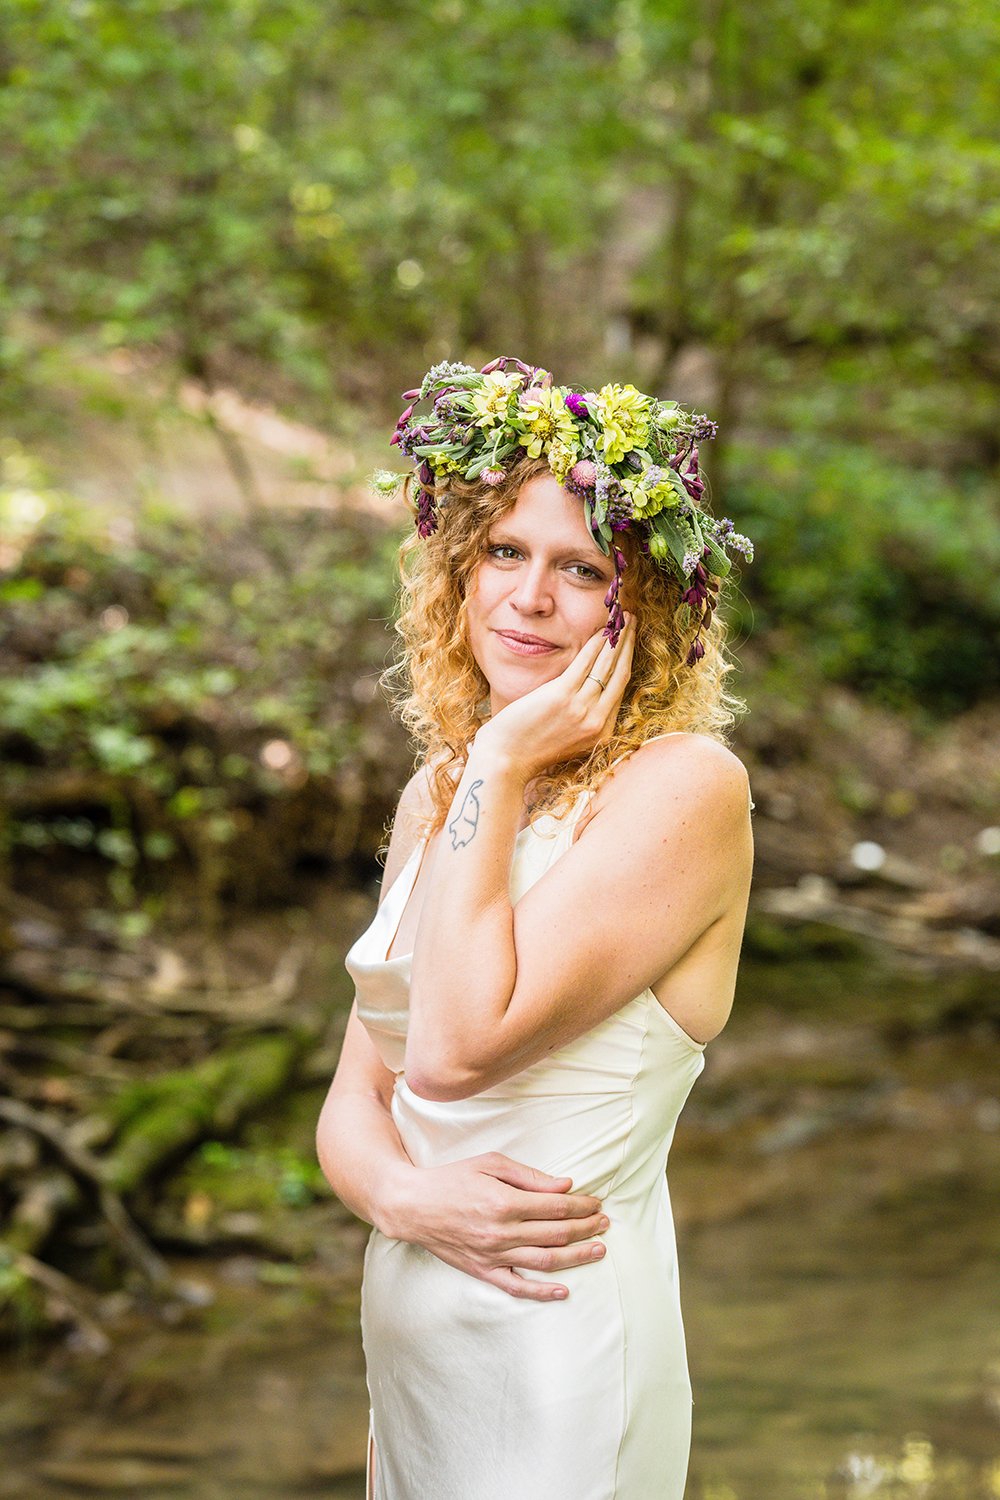 An LGBTQ+ marrier poses wearing a cream satin gown and a flower crown stands in the creek under a canopy of trees for her portraits at Fishburn Park in Roanoke, Virginia.